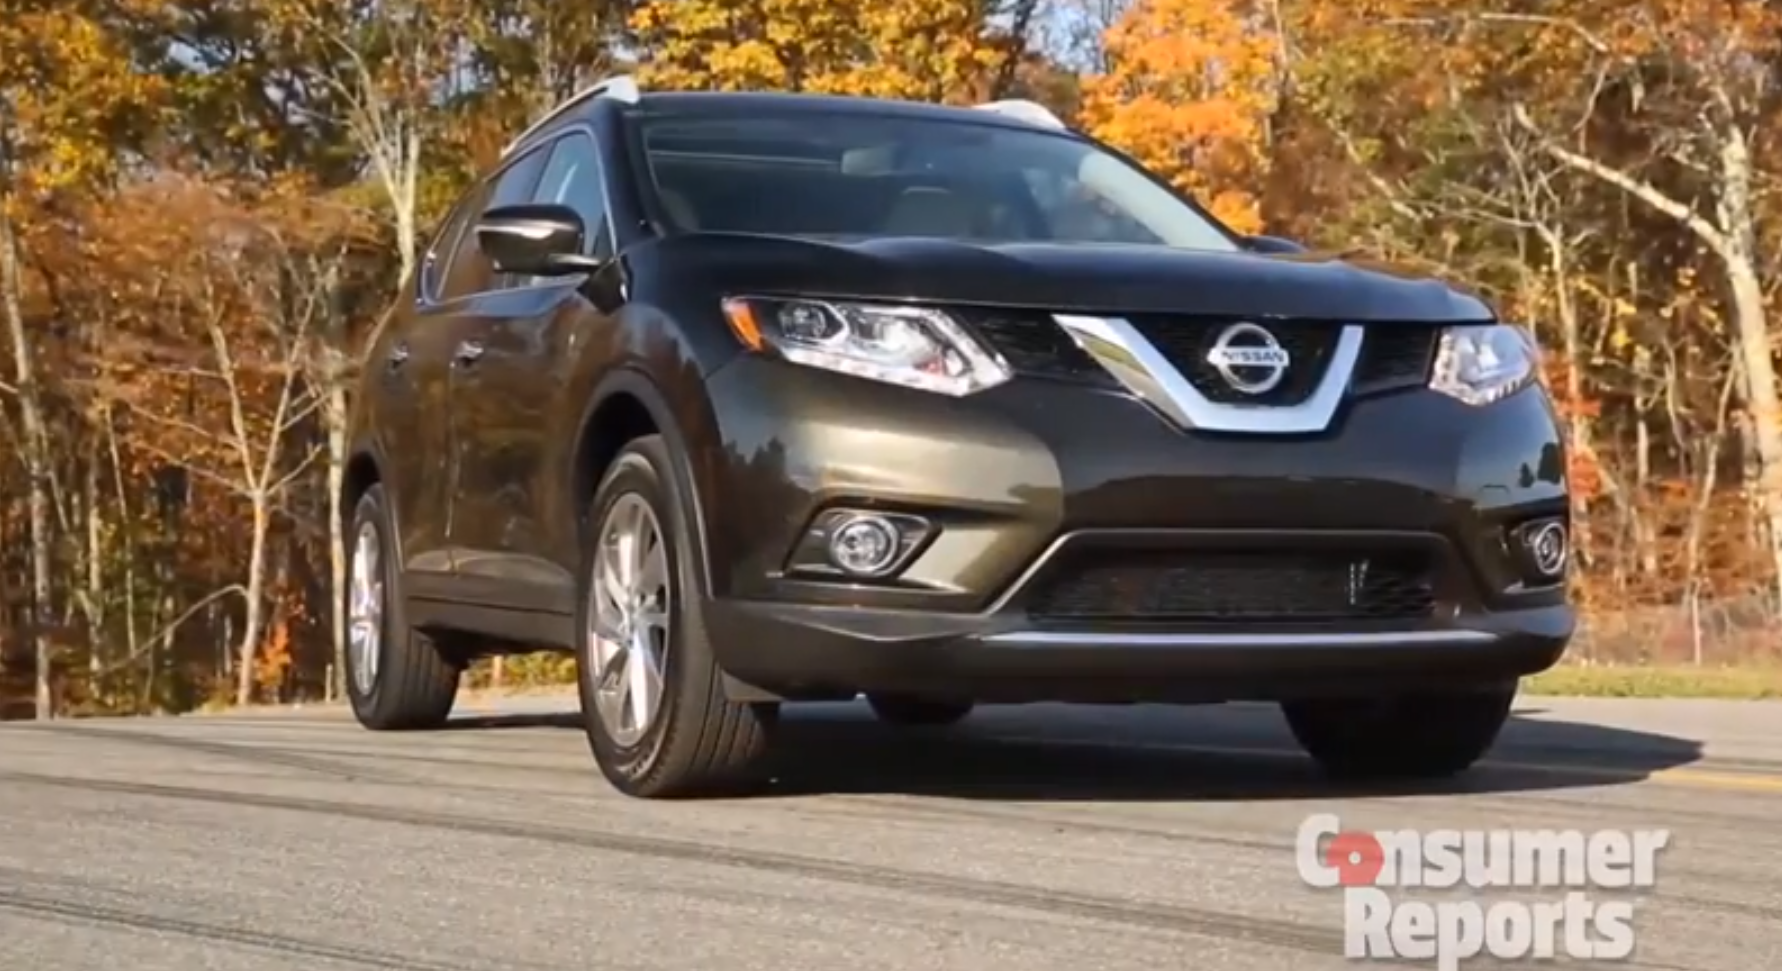 2014 Nissan Rogue Gets Very Positive Consumer Reports Review ...